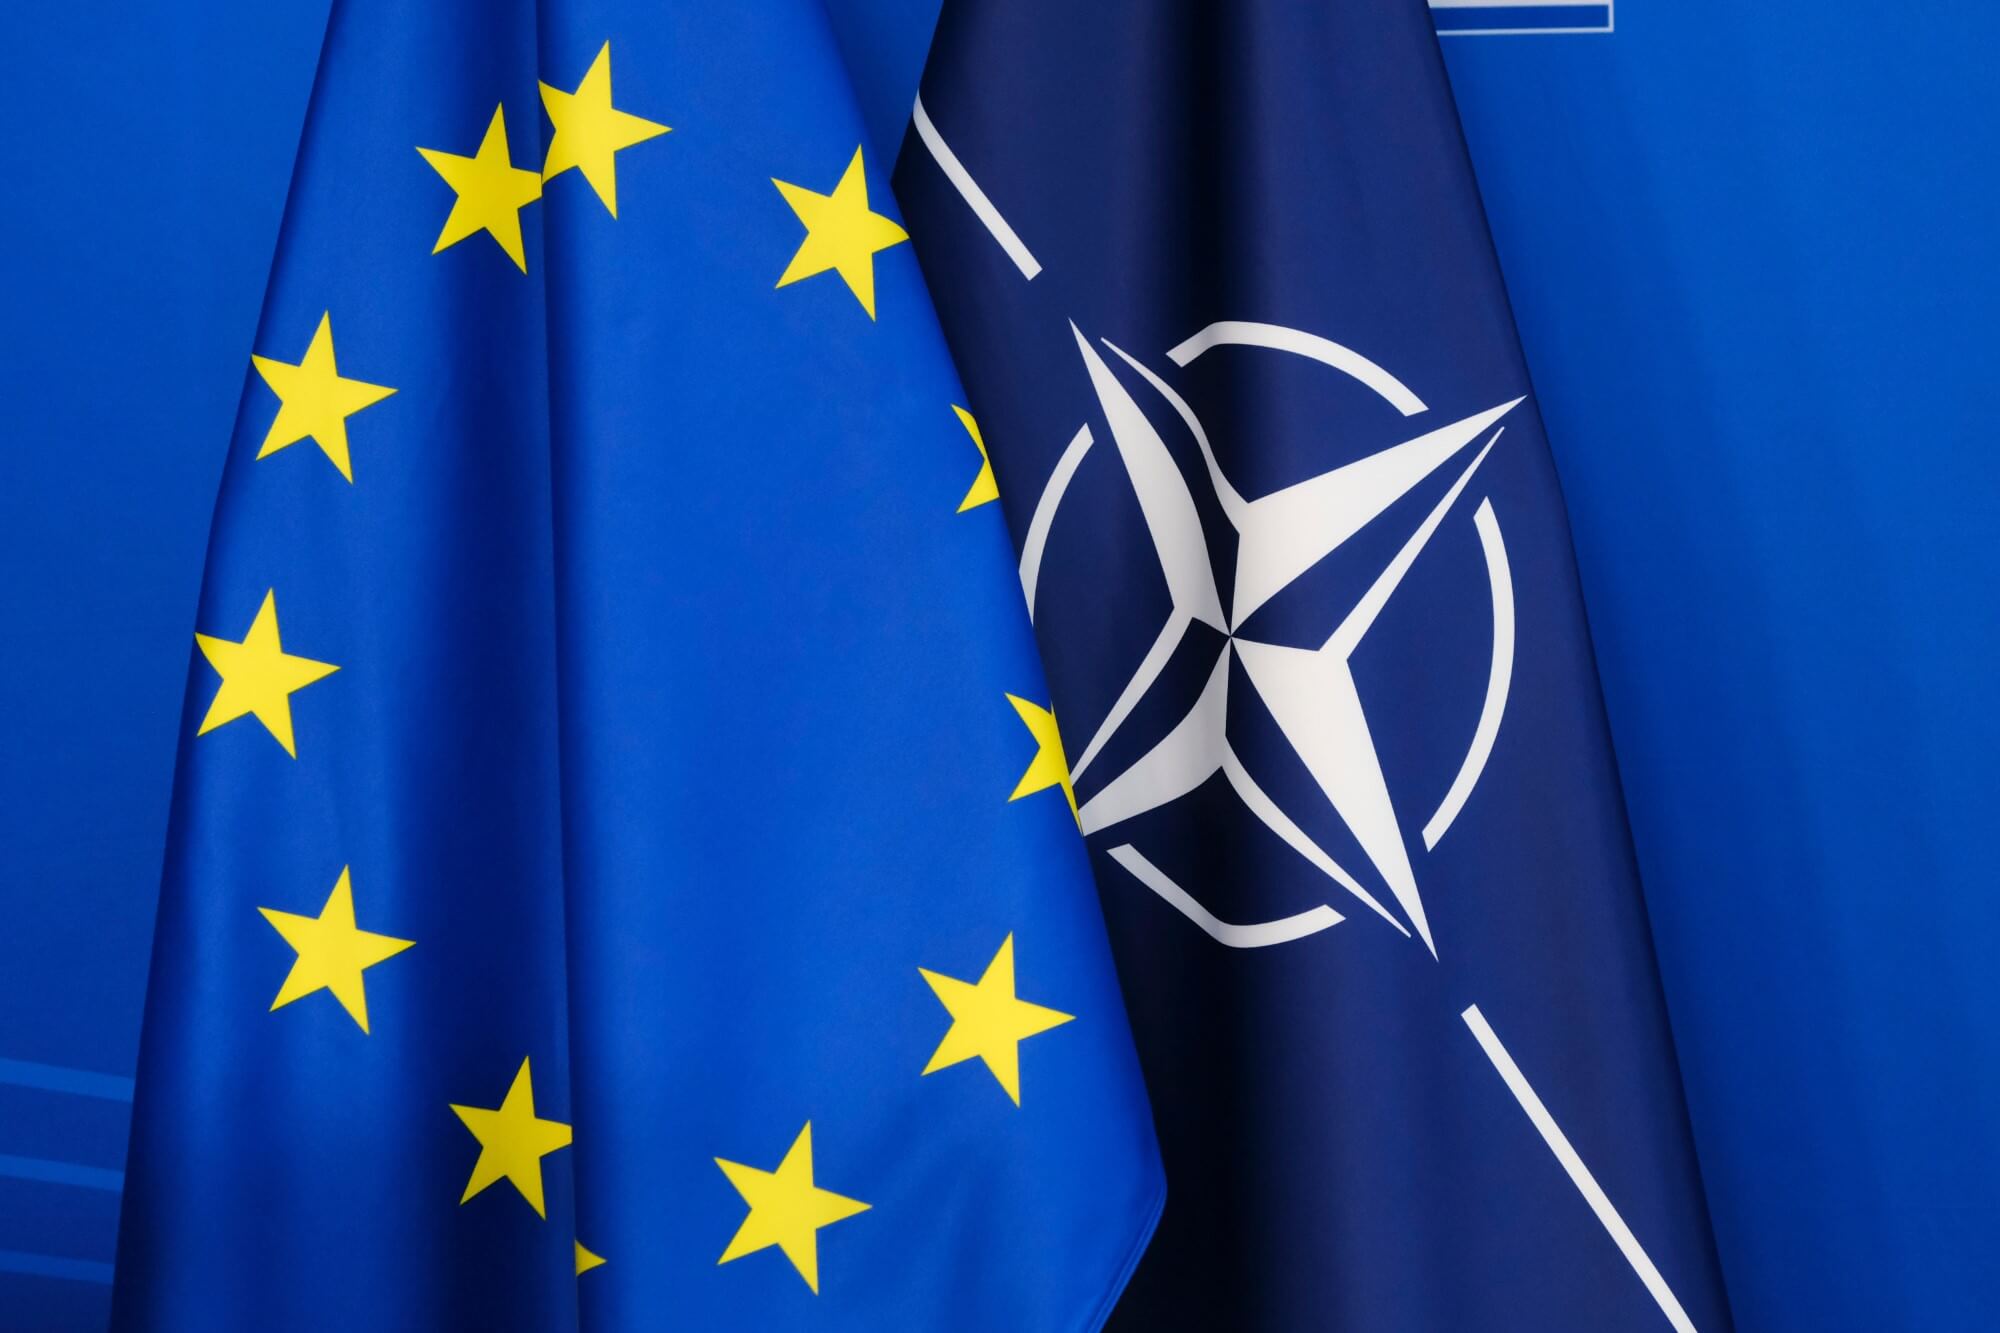 European Union and NATO flags overlapping, symbolizing the cooperation between the EU and NATO